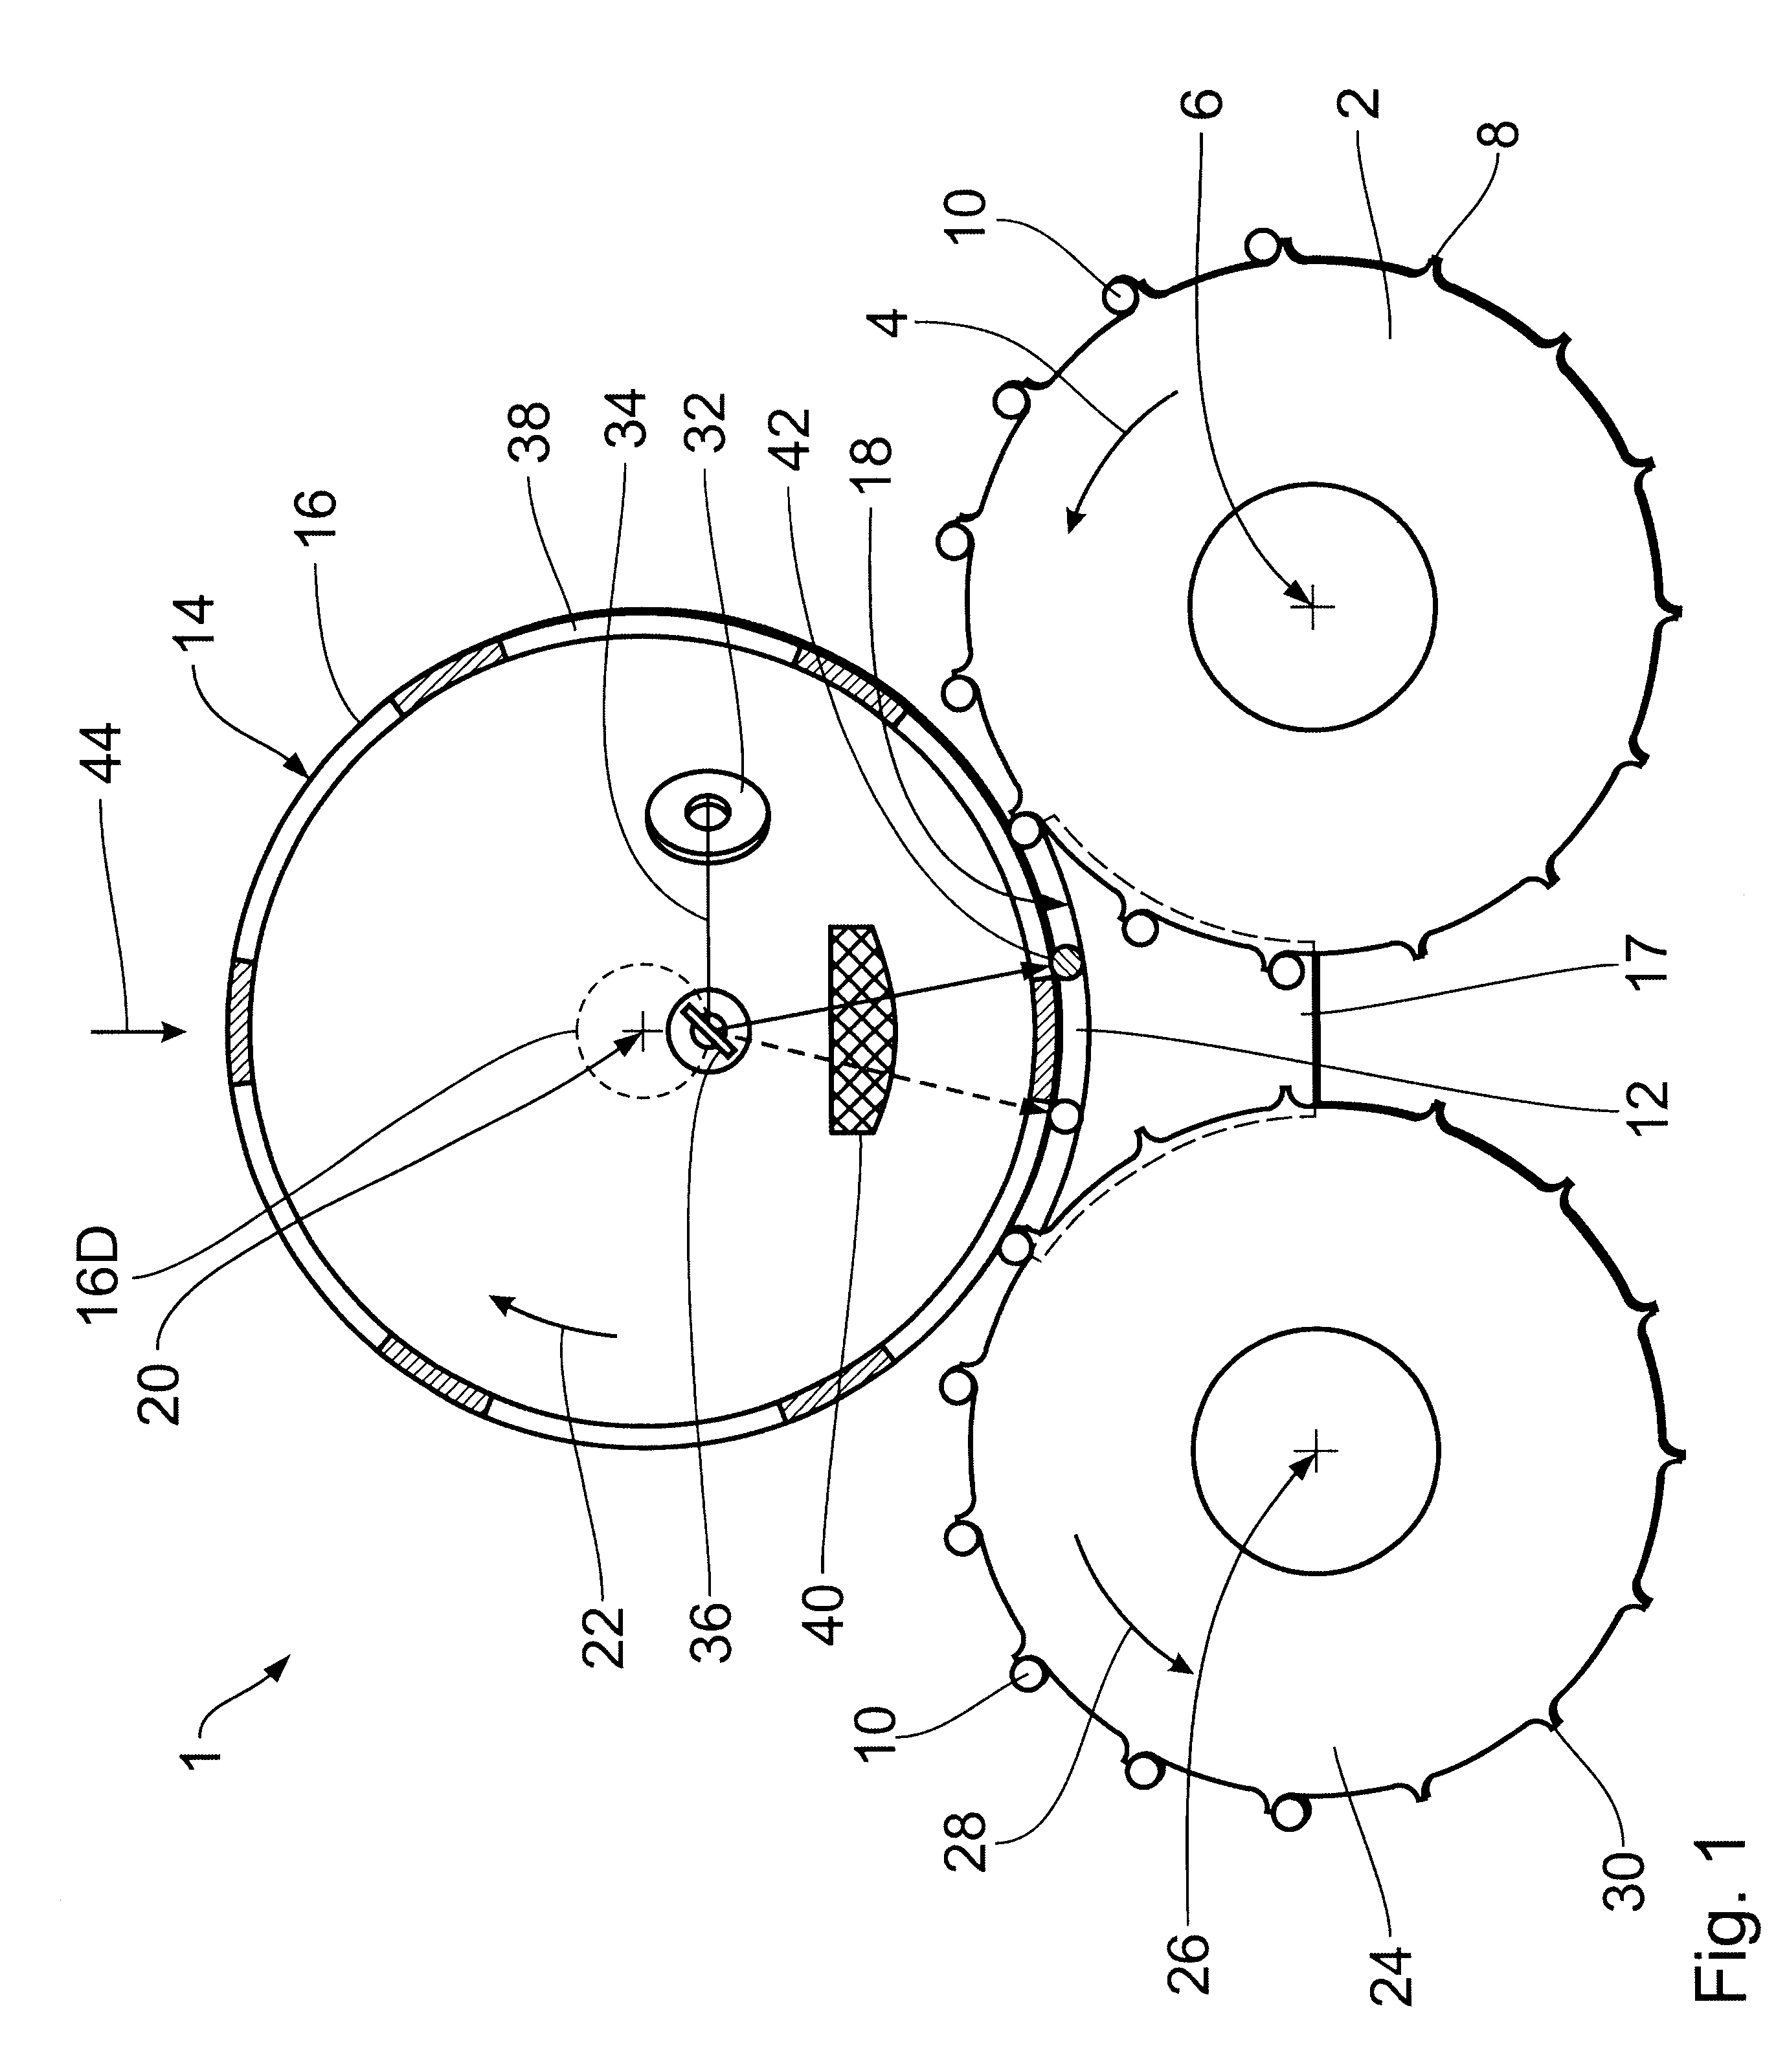 Apparatus for making perforations in the wrappers of rod-shaped products